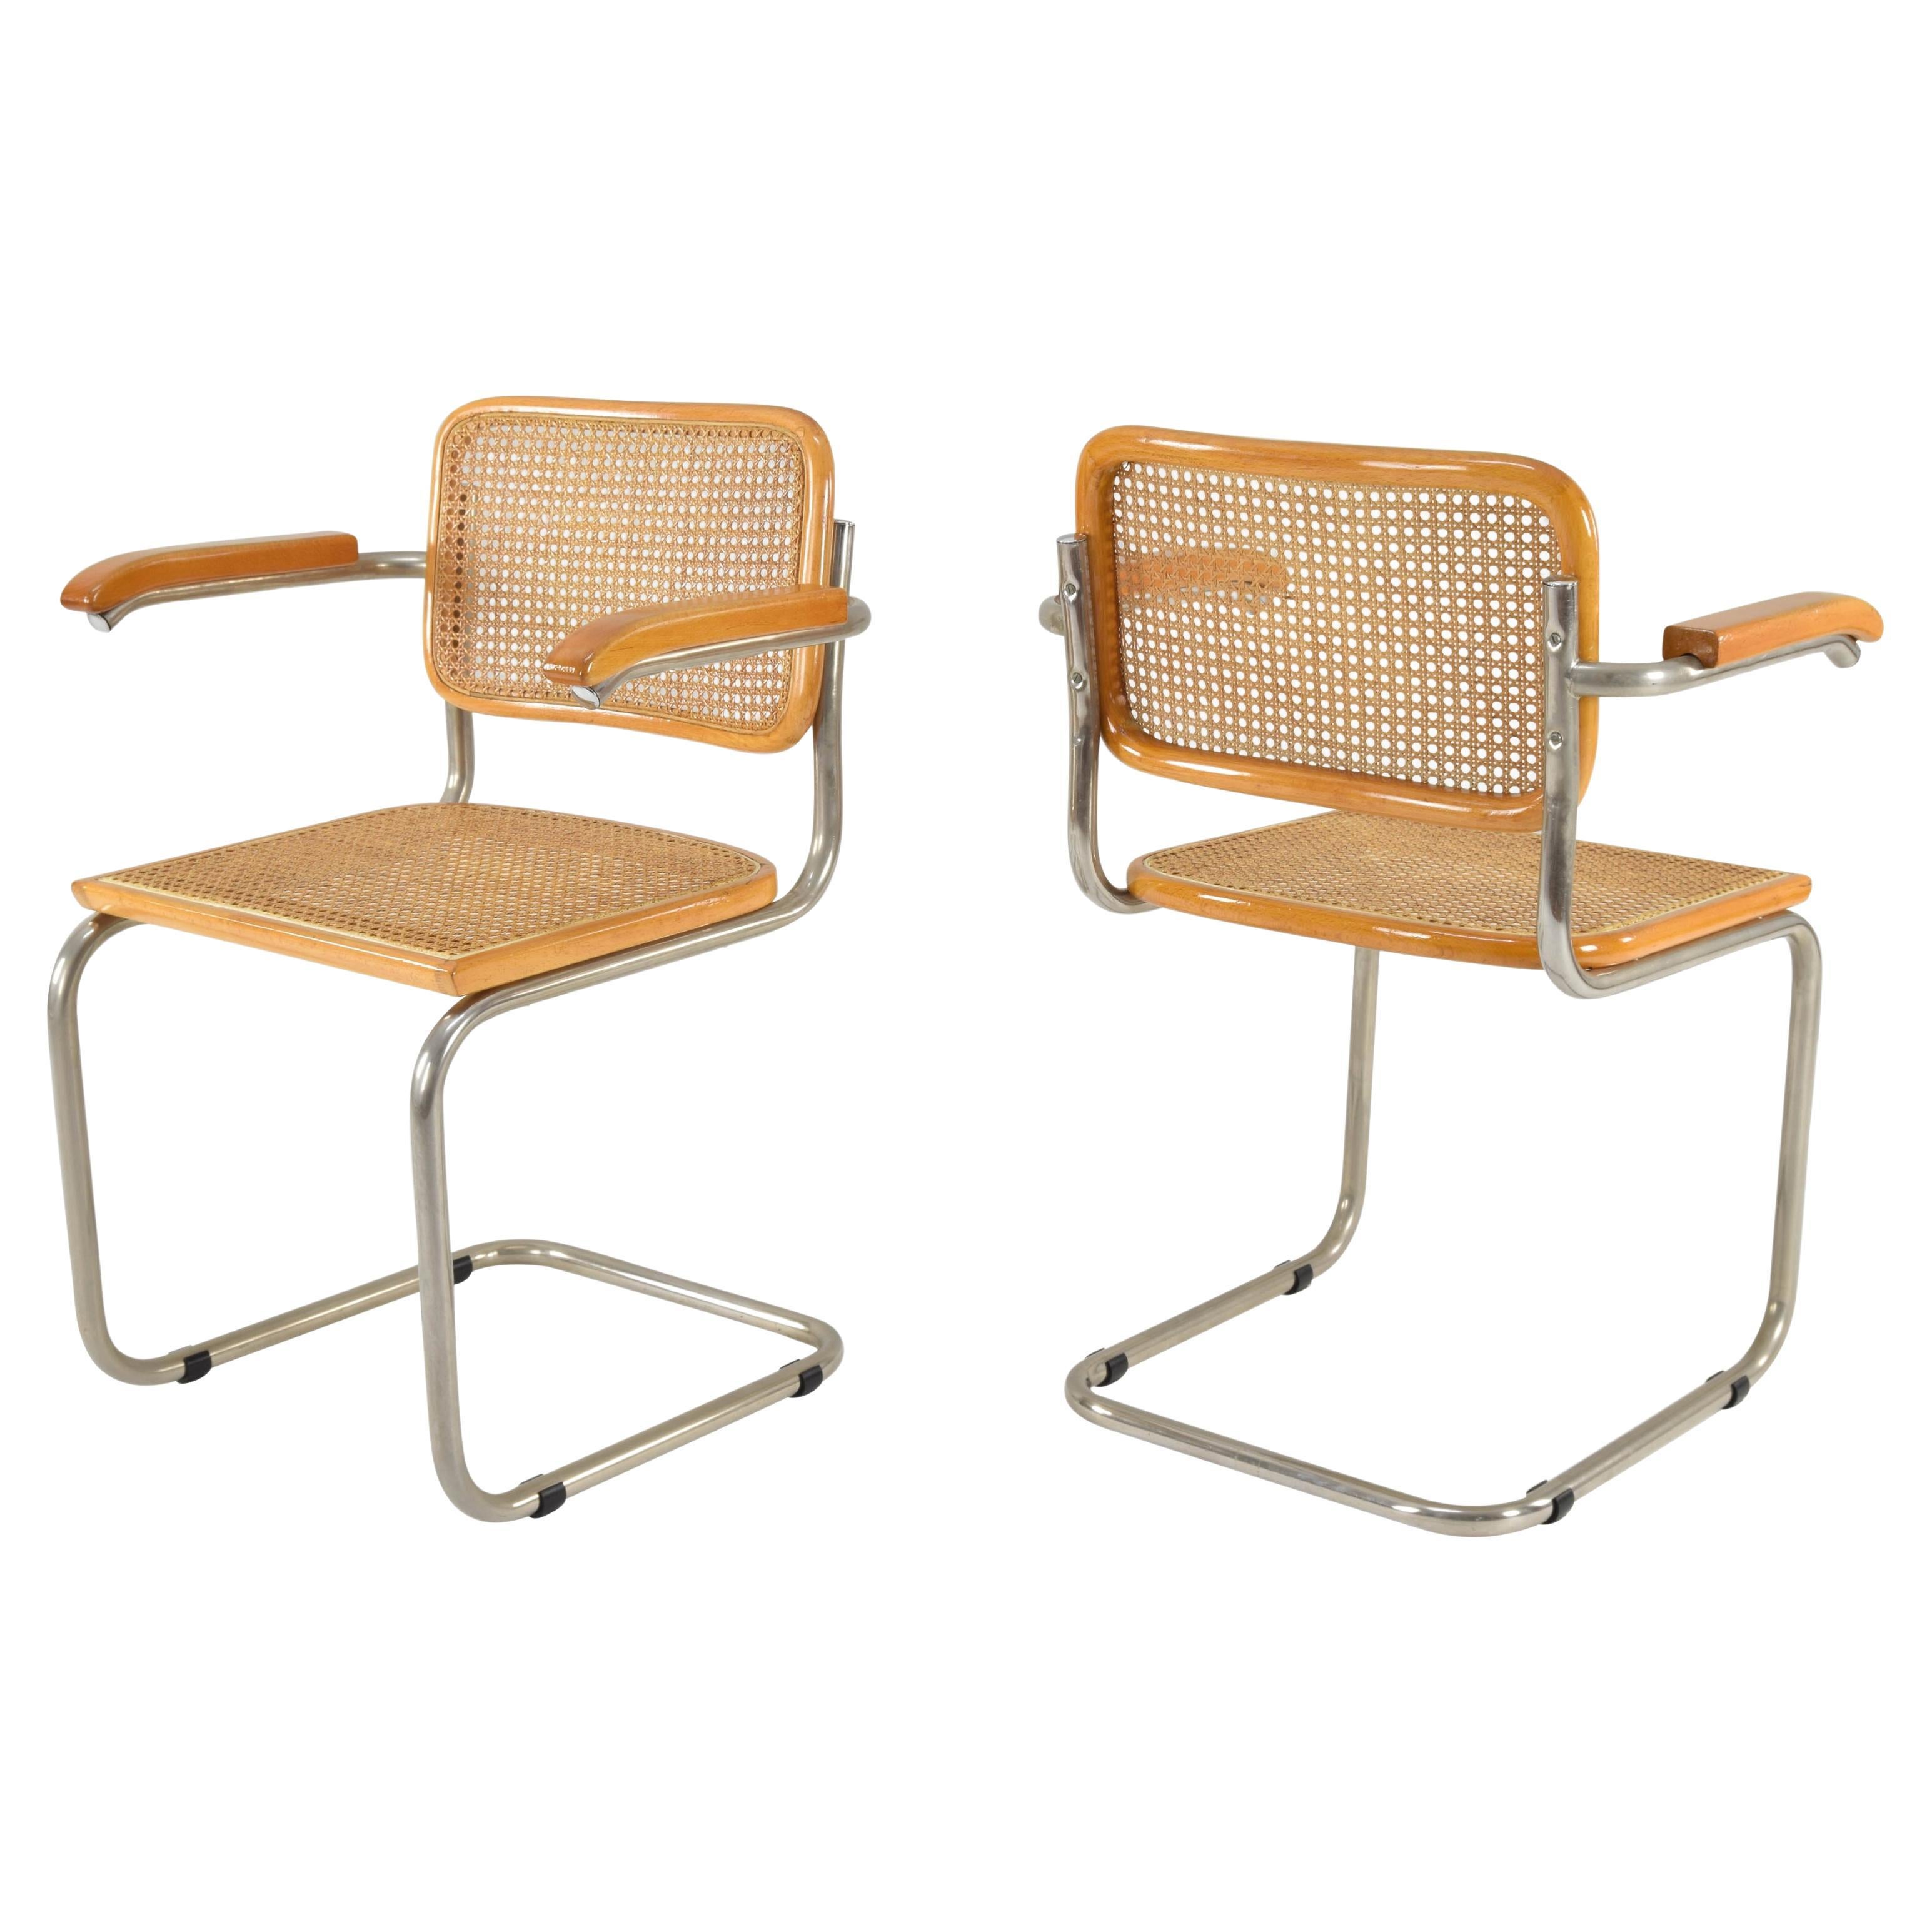 Set of Two Mid-Century Modern Marcel Breuer B64 Cesca Chairs, Italy, 1970